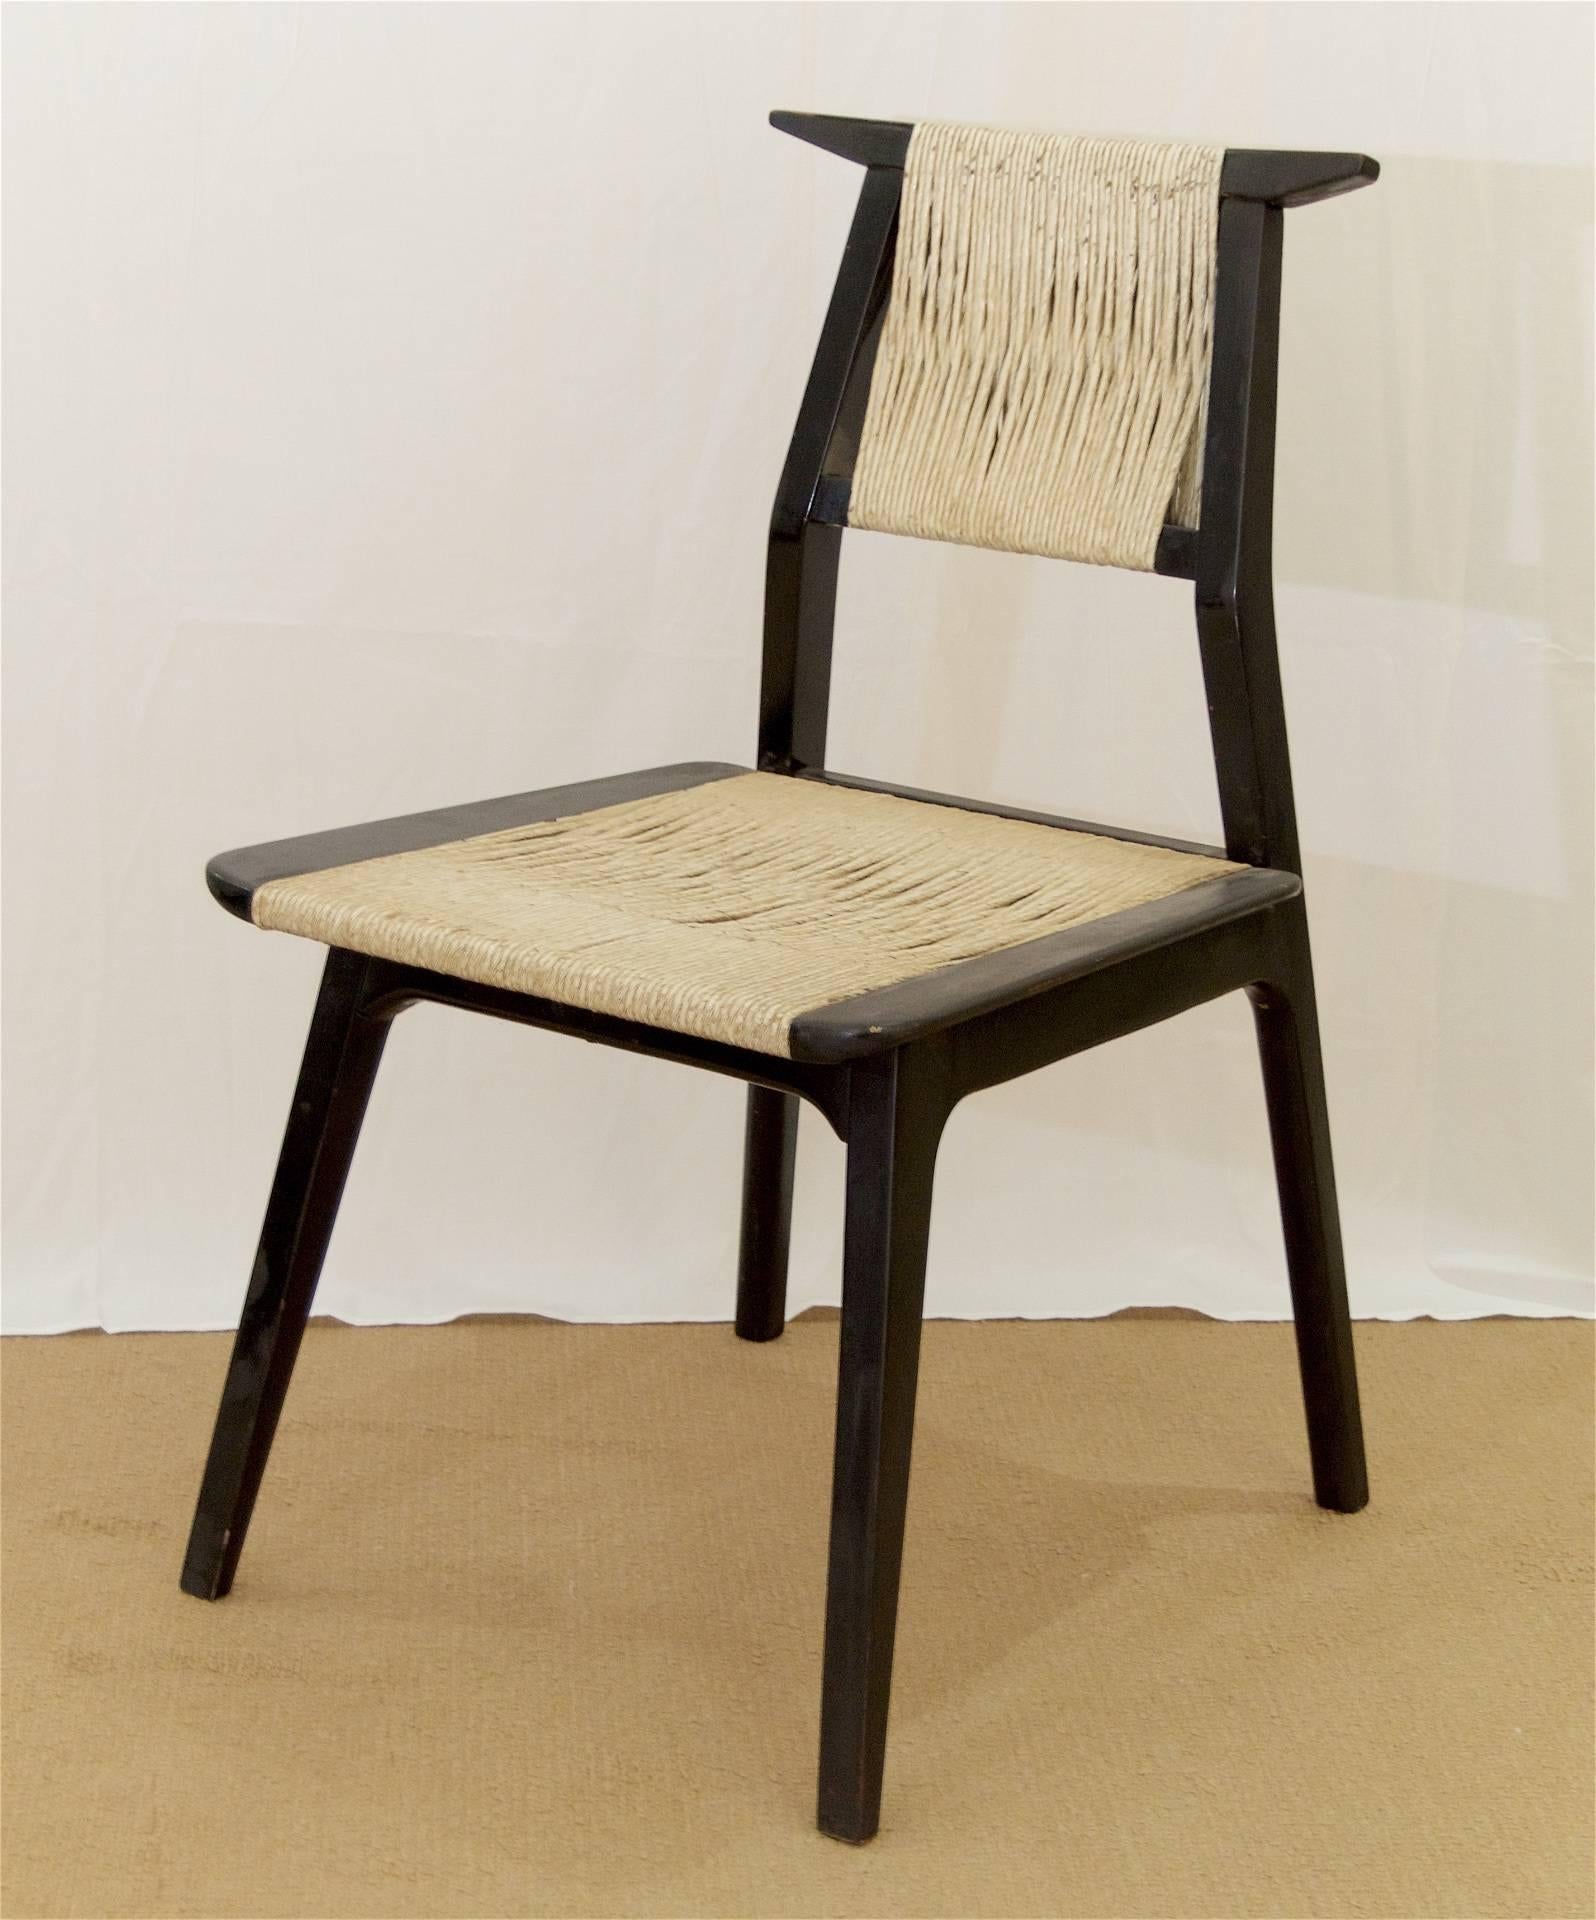 Geometric Mid-Century Danish chair, the wooden frame in satin black lacquer and the seat and back with cord-wrapped supports.

In as-is condition - please see condition notes.